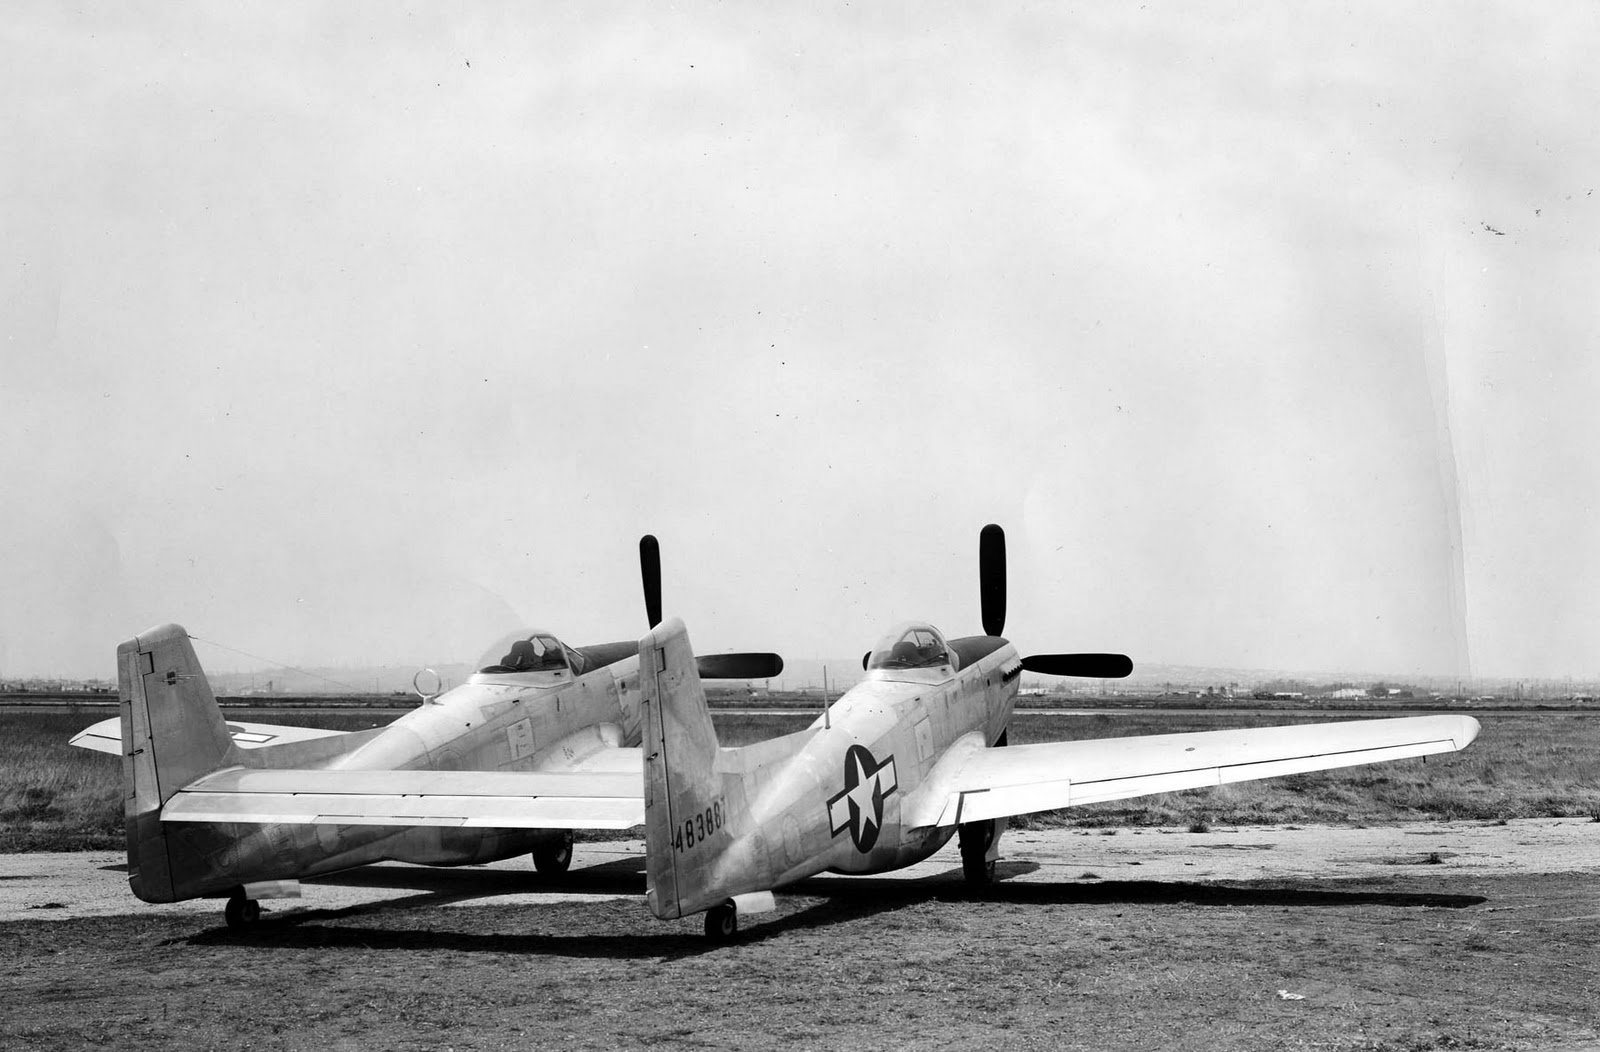 XP-82 Twin Mustang Project: Vintage Photographs